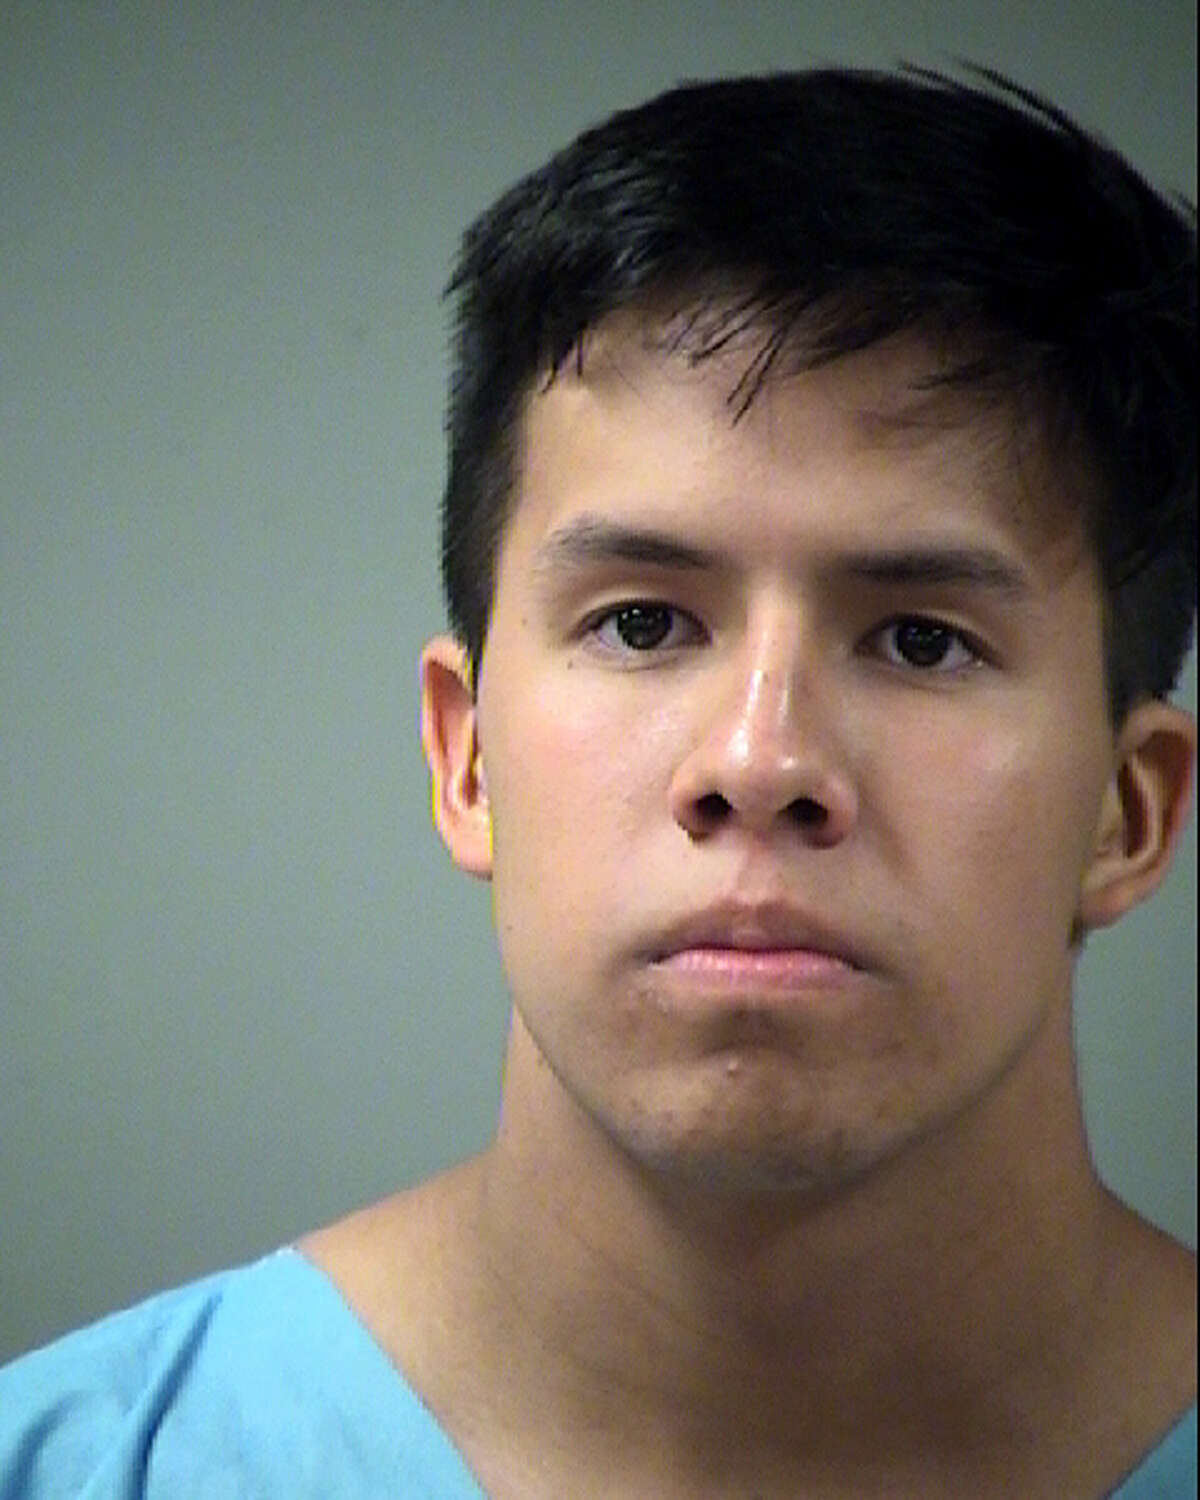 Hugo Salazar, 18, faces a charge of aggravated sexual assault of a child. He was booked into the Bexar County Jail on a $50,000 bond.